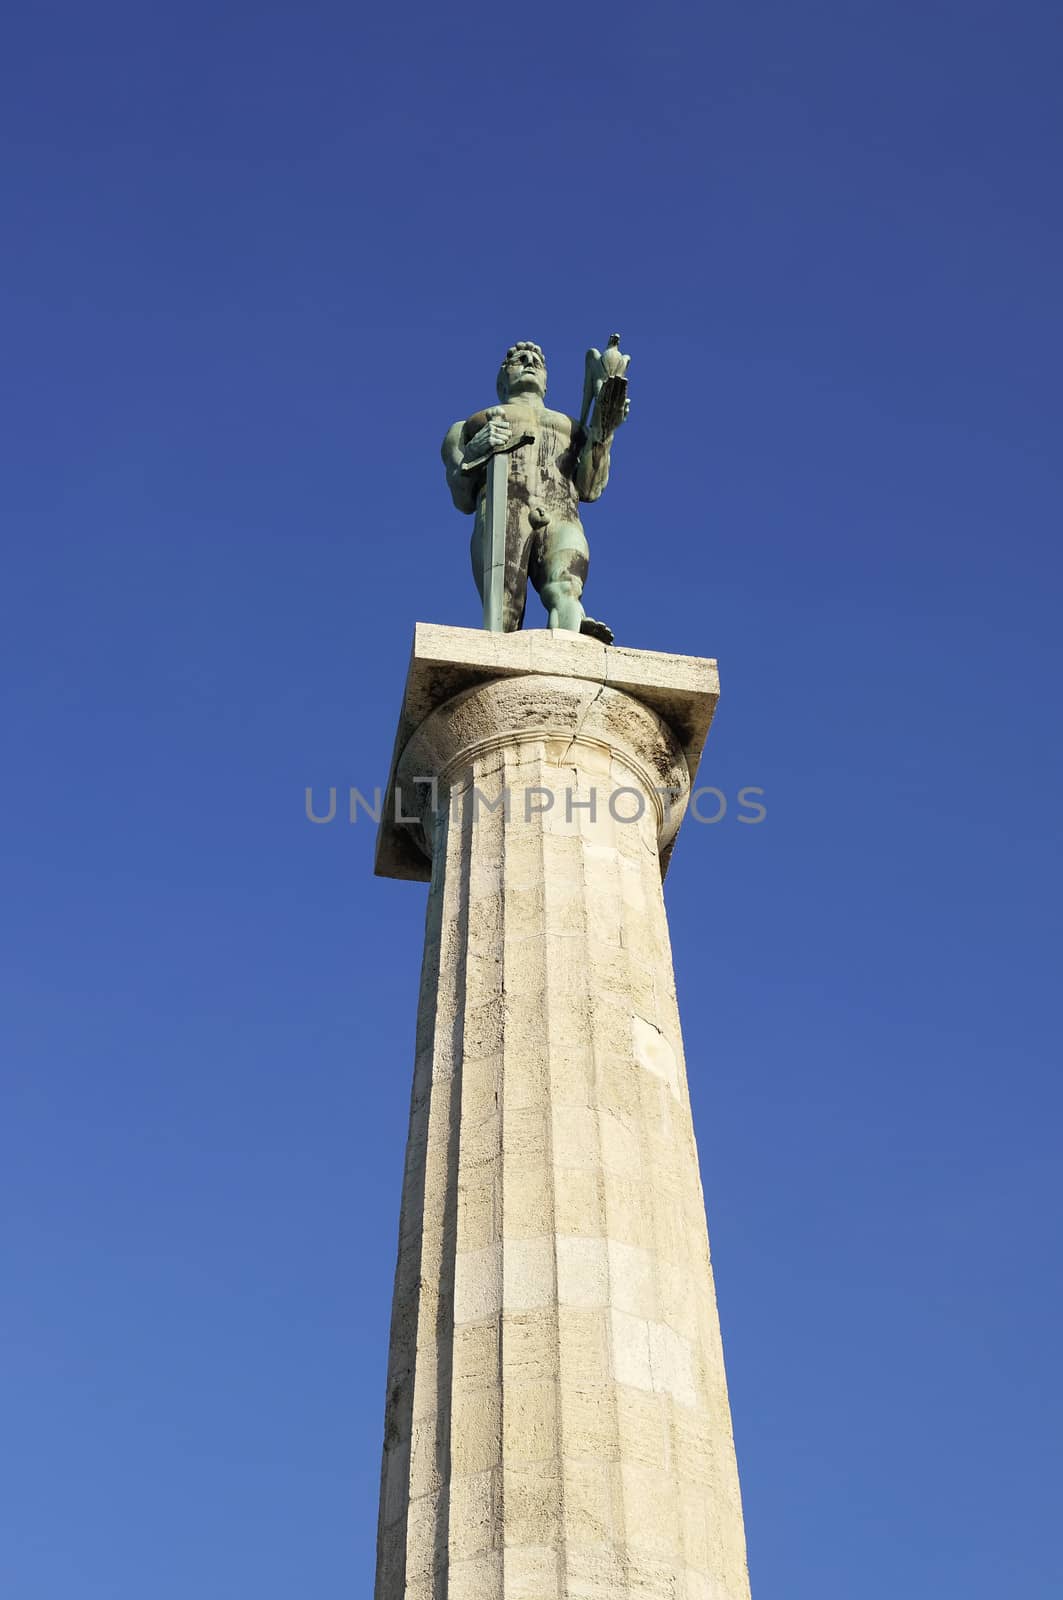 Victor monument by magraphics